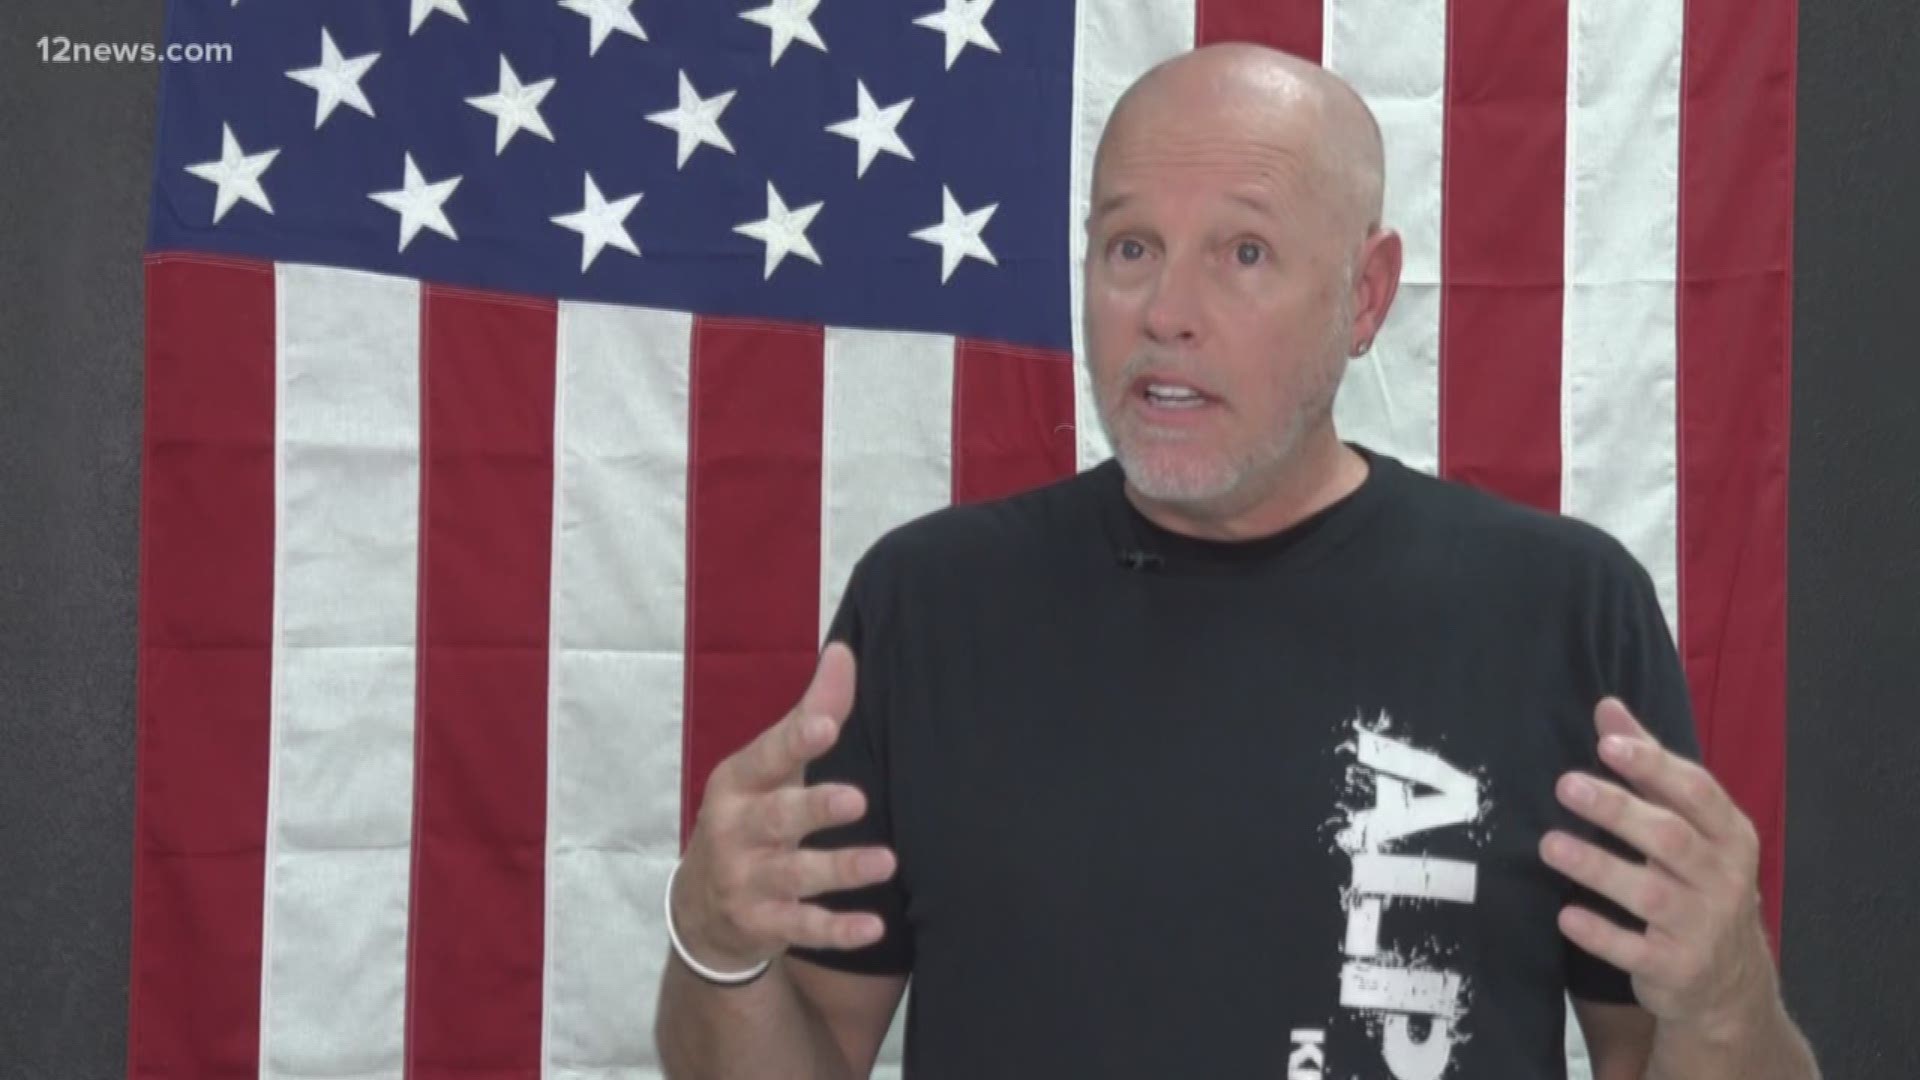 Joseph Edmondson is offering a free class from 1 p.m. to 4 p.m. Saturday at Alpha Krav Maga in Scottsdale.